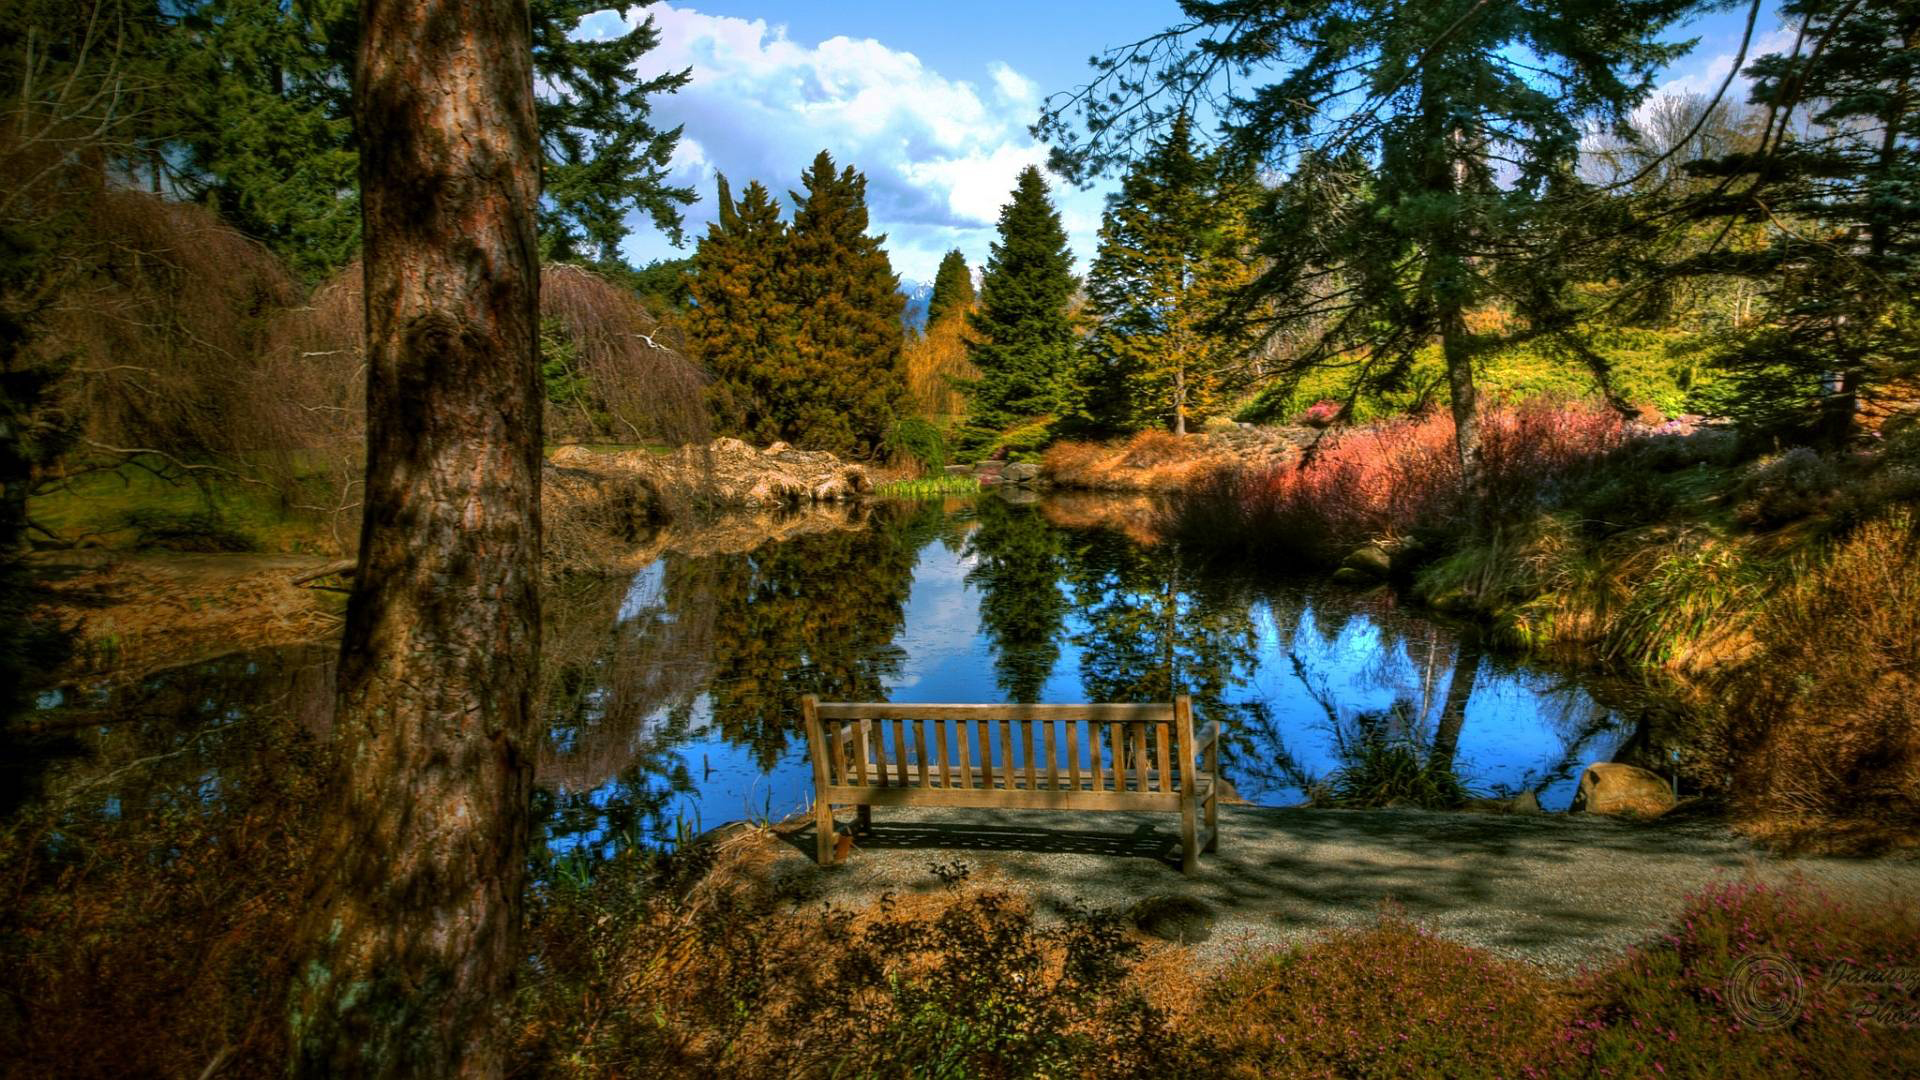 Wood Bench On Sand Lake Surrounded By Green Trees Plants Bushes Reflection On Water HD Scenery